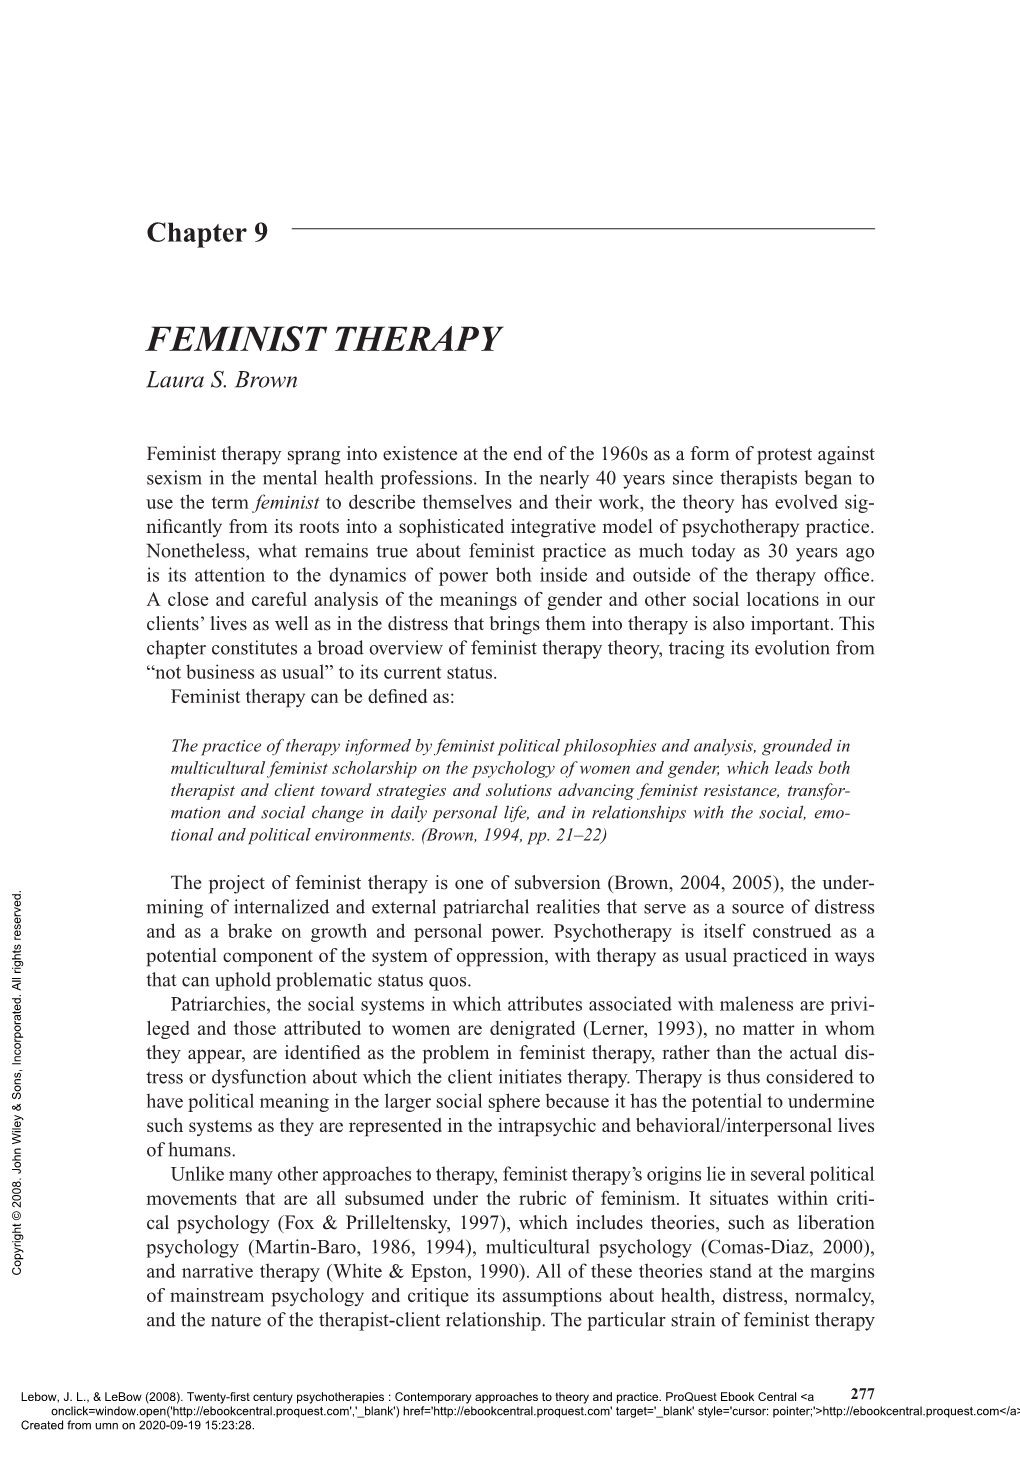 FEMINIST THERAPY Laura S